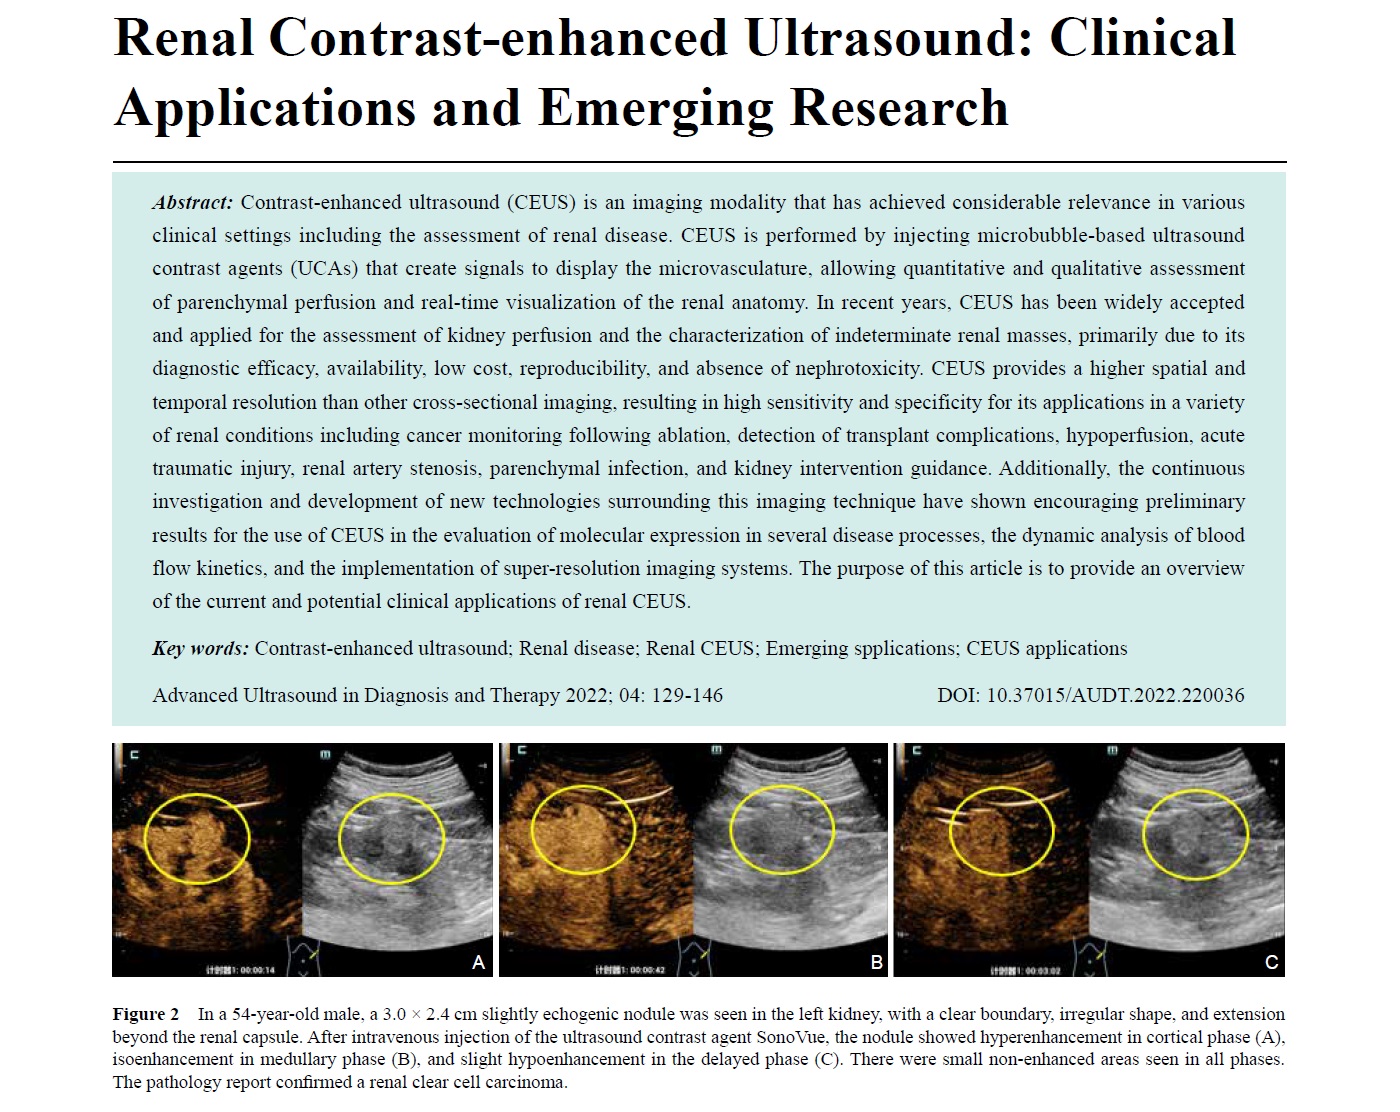 Renal Contrast-enhanced Ultrasound: Clinical Applications and Emerging Researc